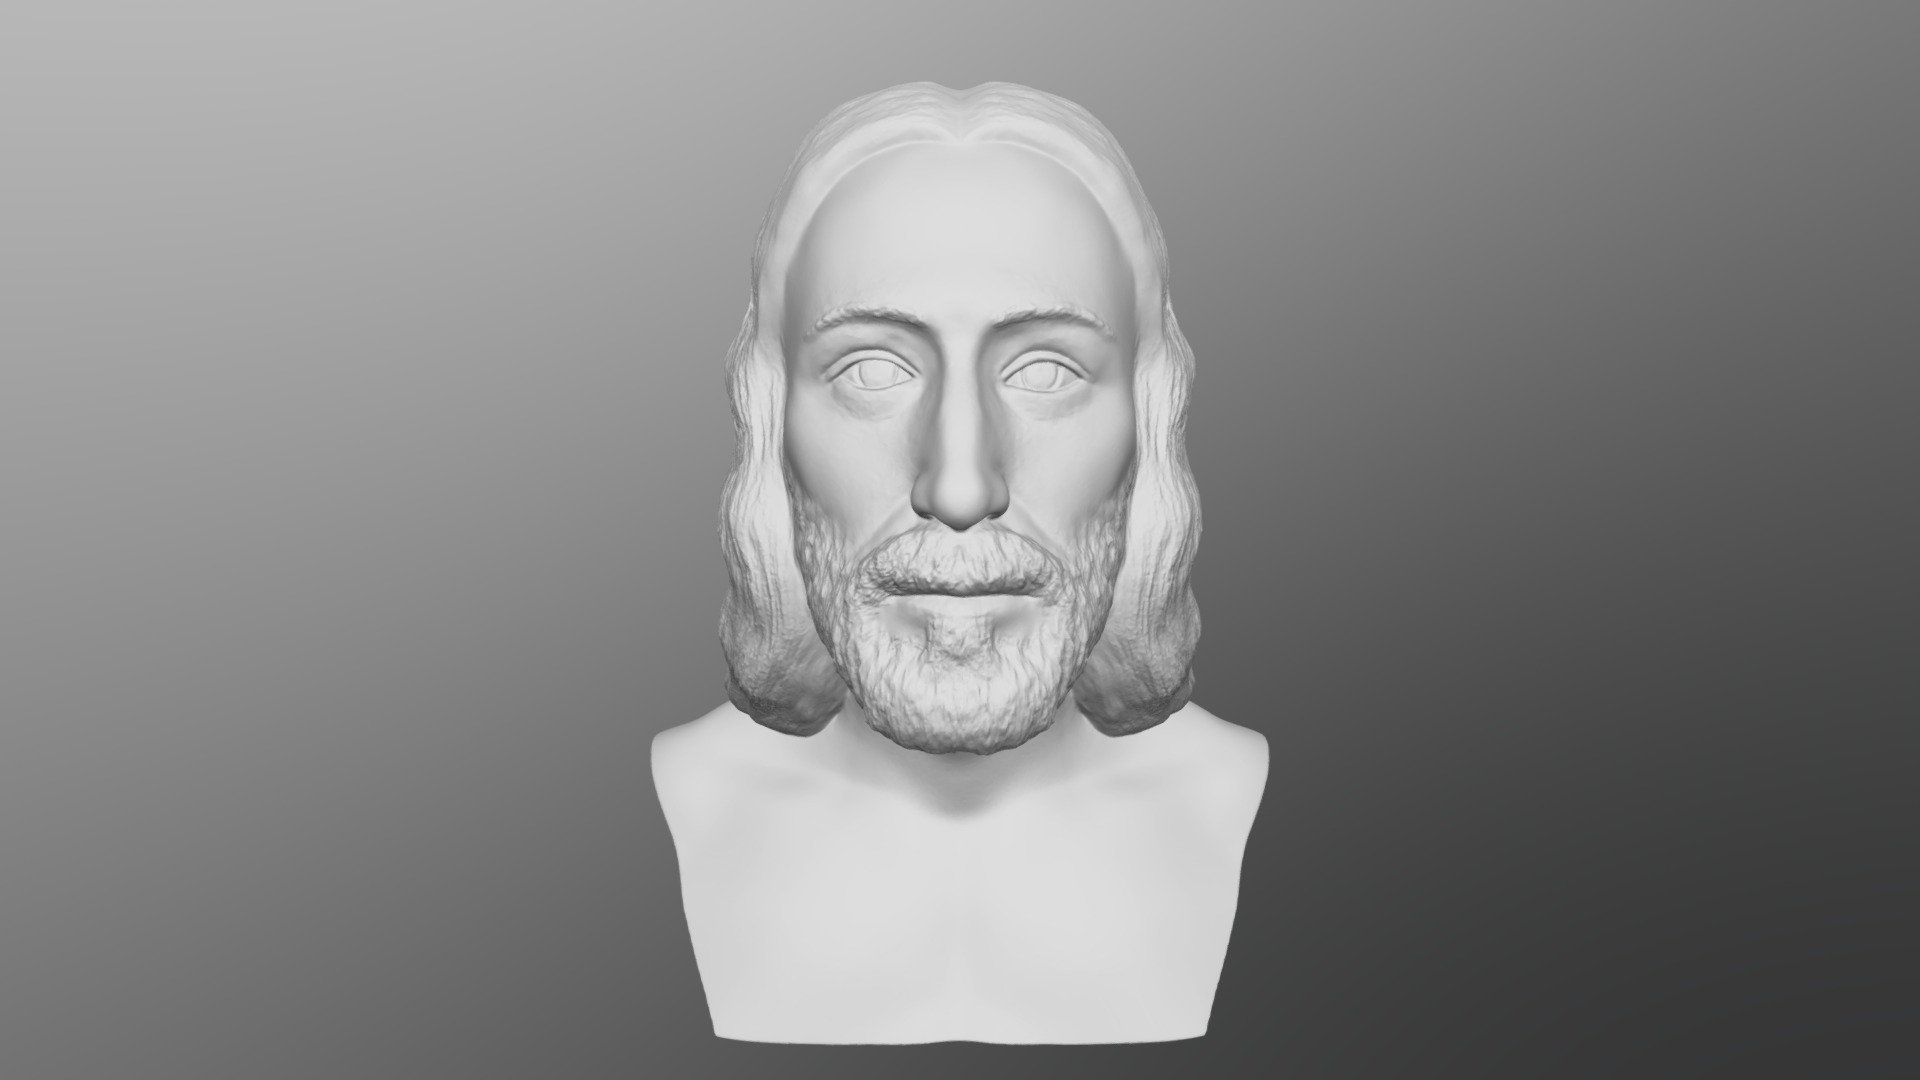 3D model Jesus reconstruction based on Shroud of Turin - This is a 3D model of the Jesus reconstruction based on Shroud of Turin. The 3D model is about a statue of a person.